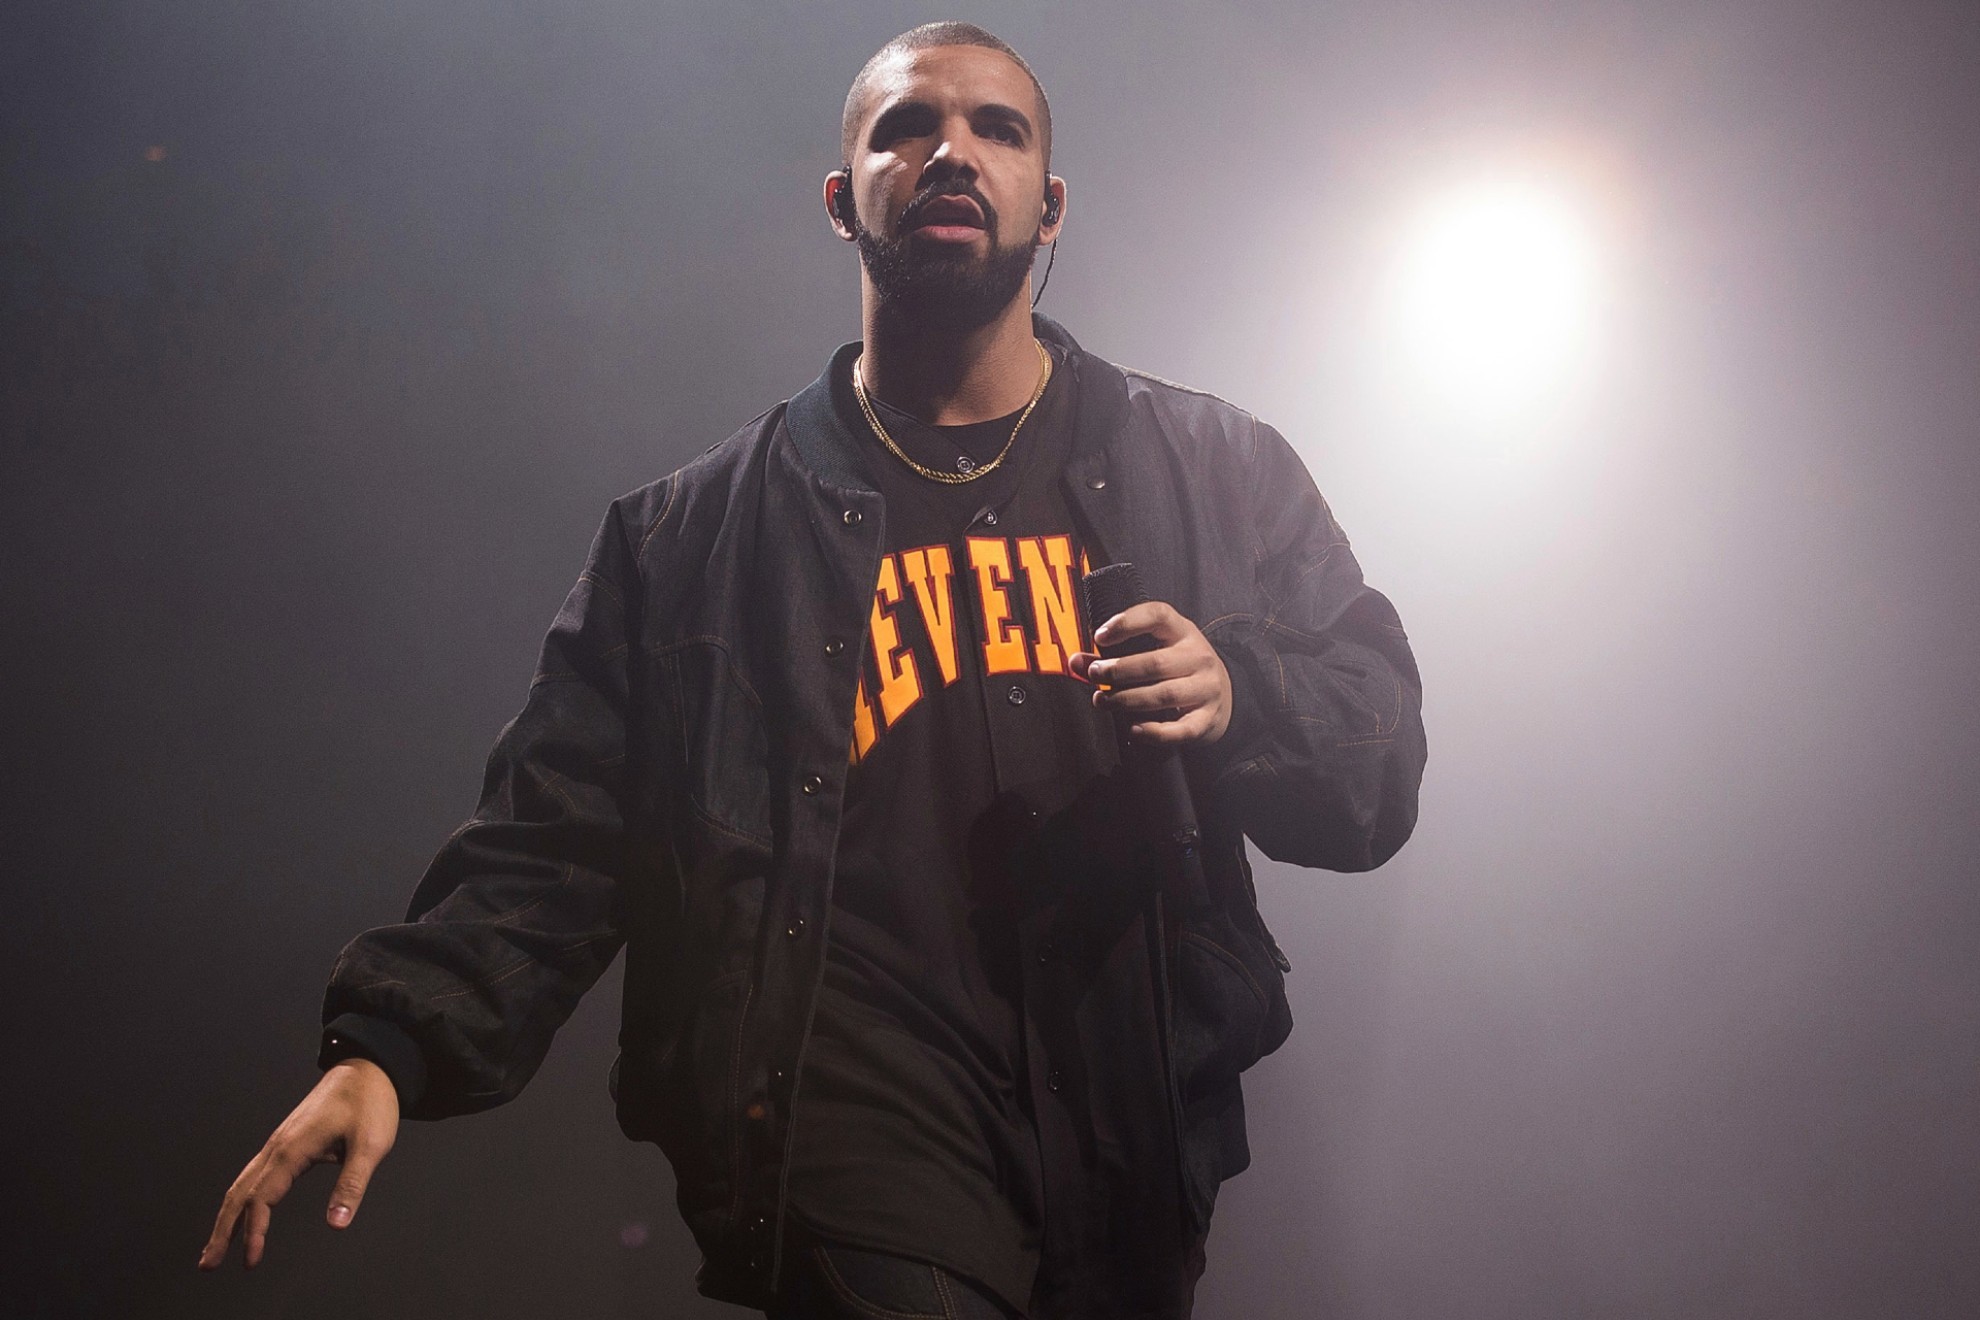 Drake performs during a concert as part of the Summer Sixteen Tour in New York.